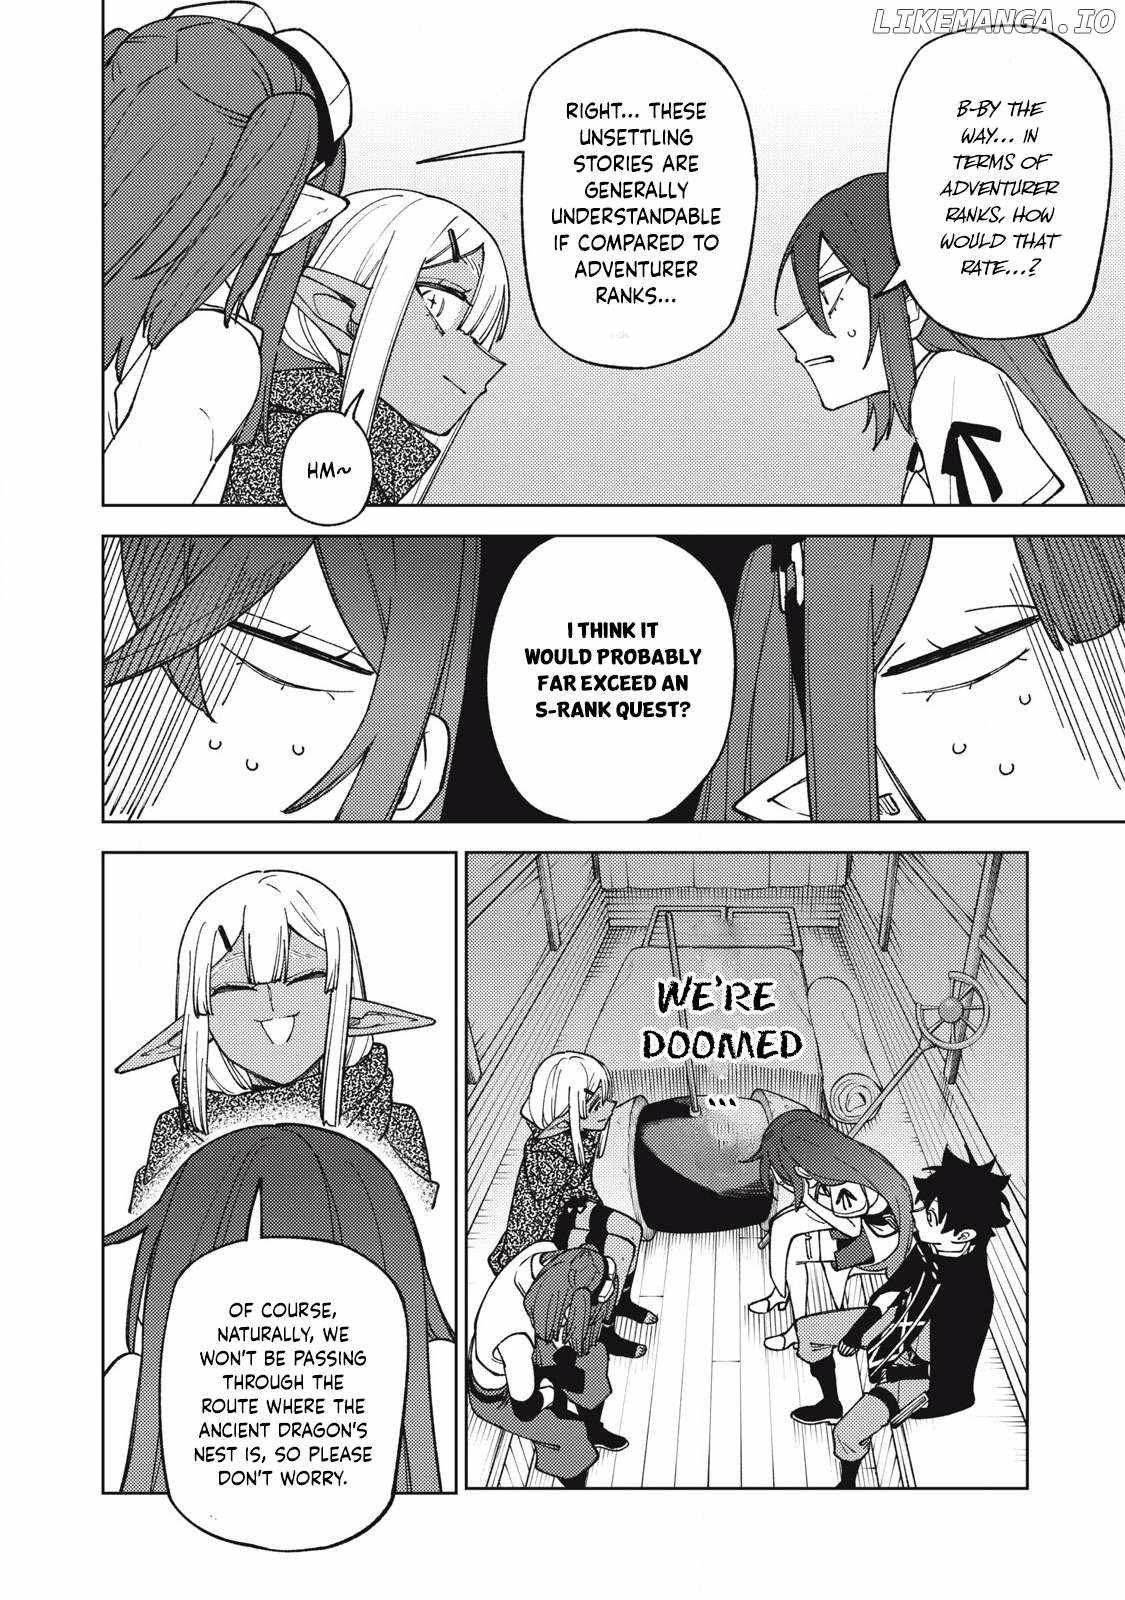 read My S-Rank Party Fired Me for Being a Cursificer ~ I Can Only Make “Cursed Items”, but They're Artifact Class! Chapter 32-2 Manga Online Free at Mangabuddy, MangaNato,Manhwatop | MangaSo.com